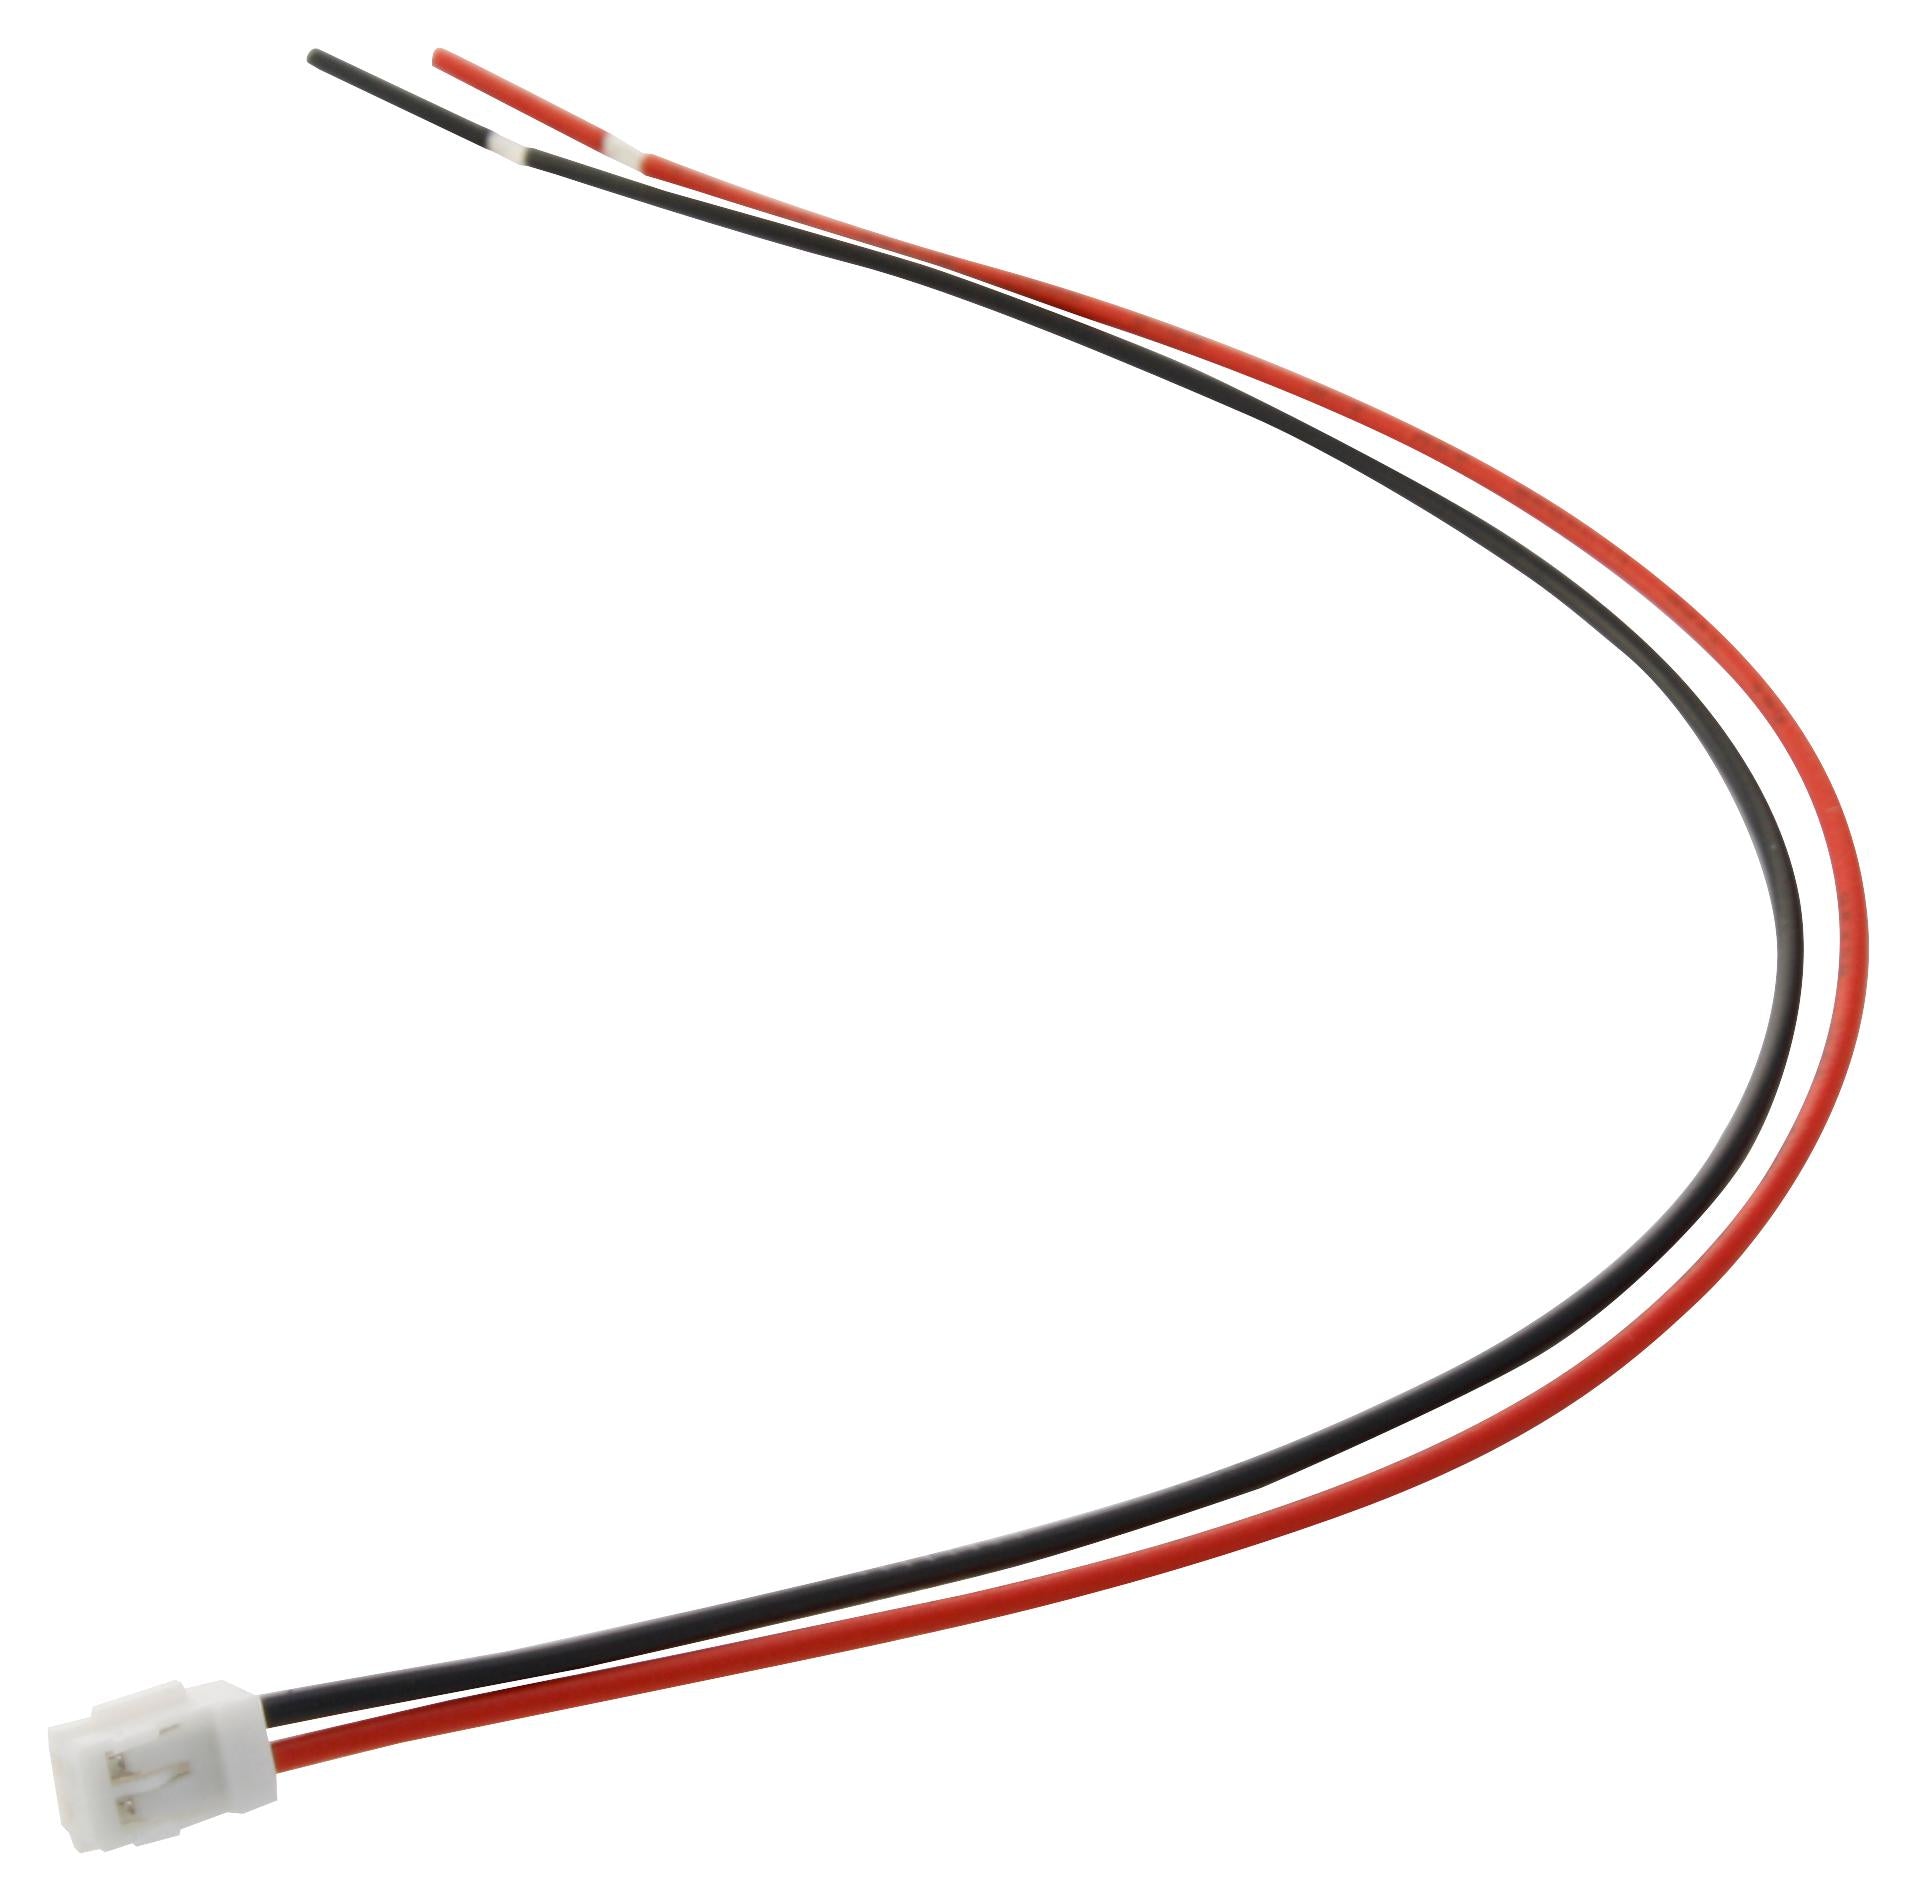 2058943-1 CABLE ASSBLY, 6IN, 2WAY TE CONNECTIVITY